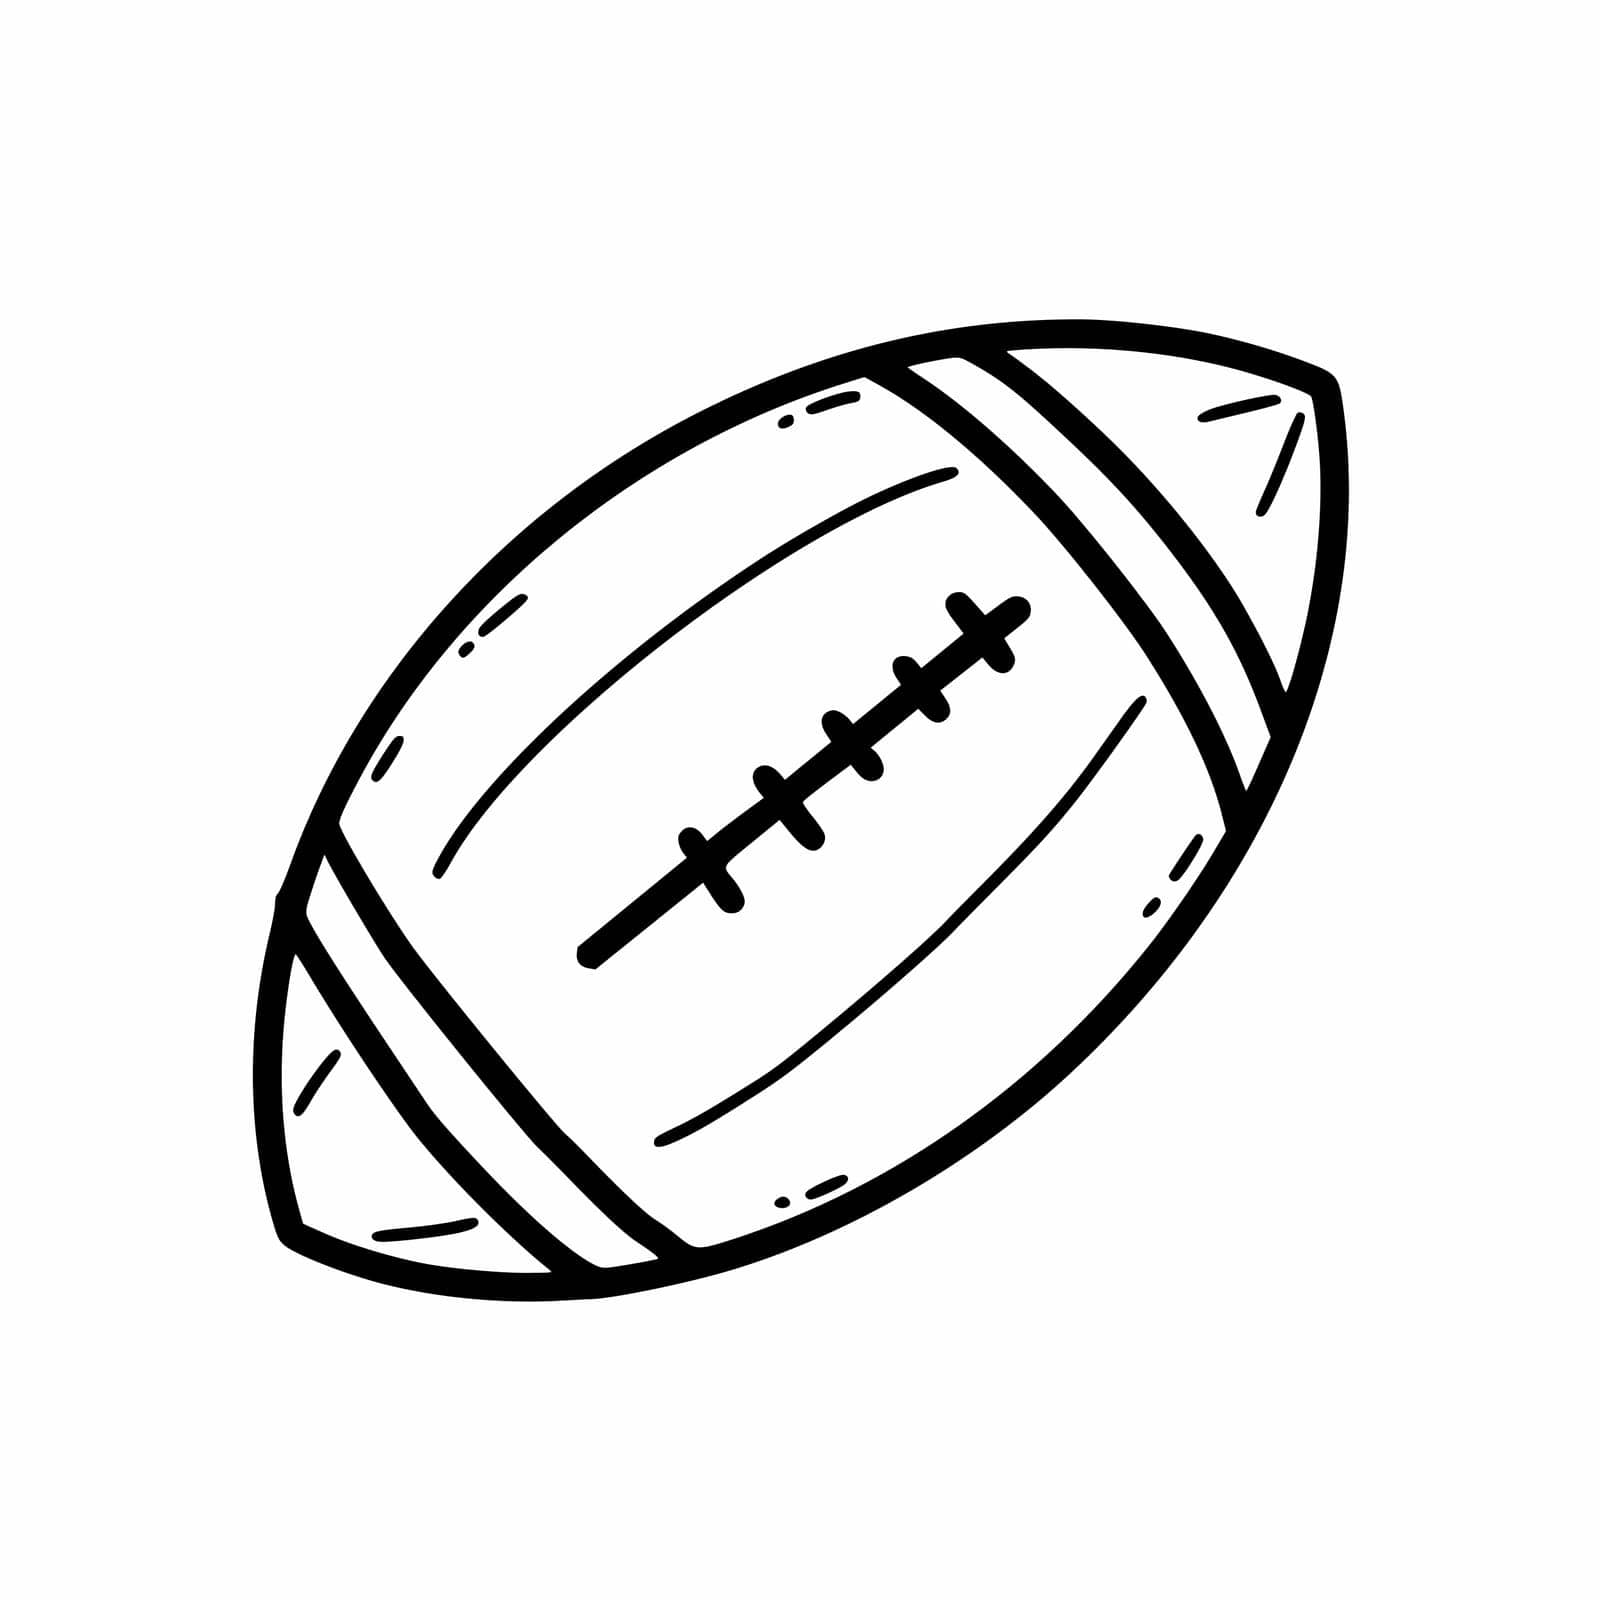 Ball for American football. National sport. Fumble. Vector doodle illustration. Rugby. by polinka_art